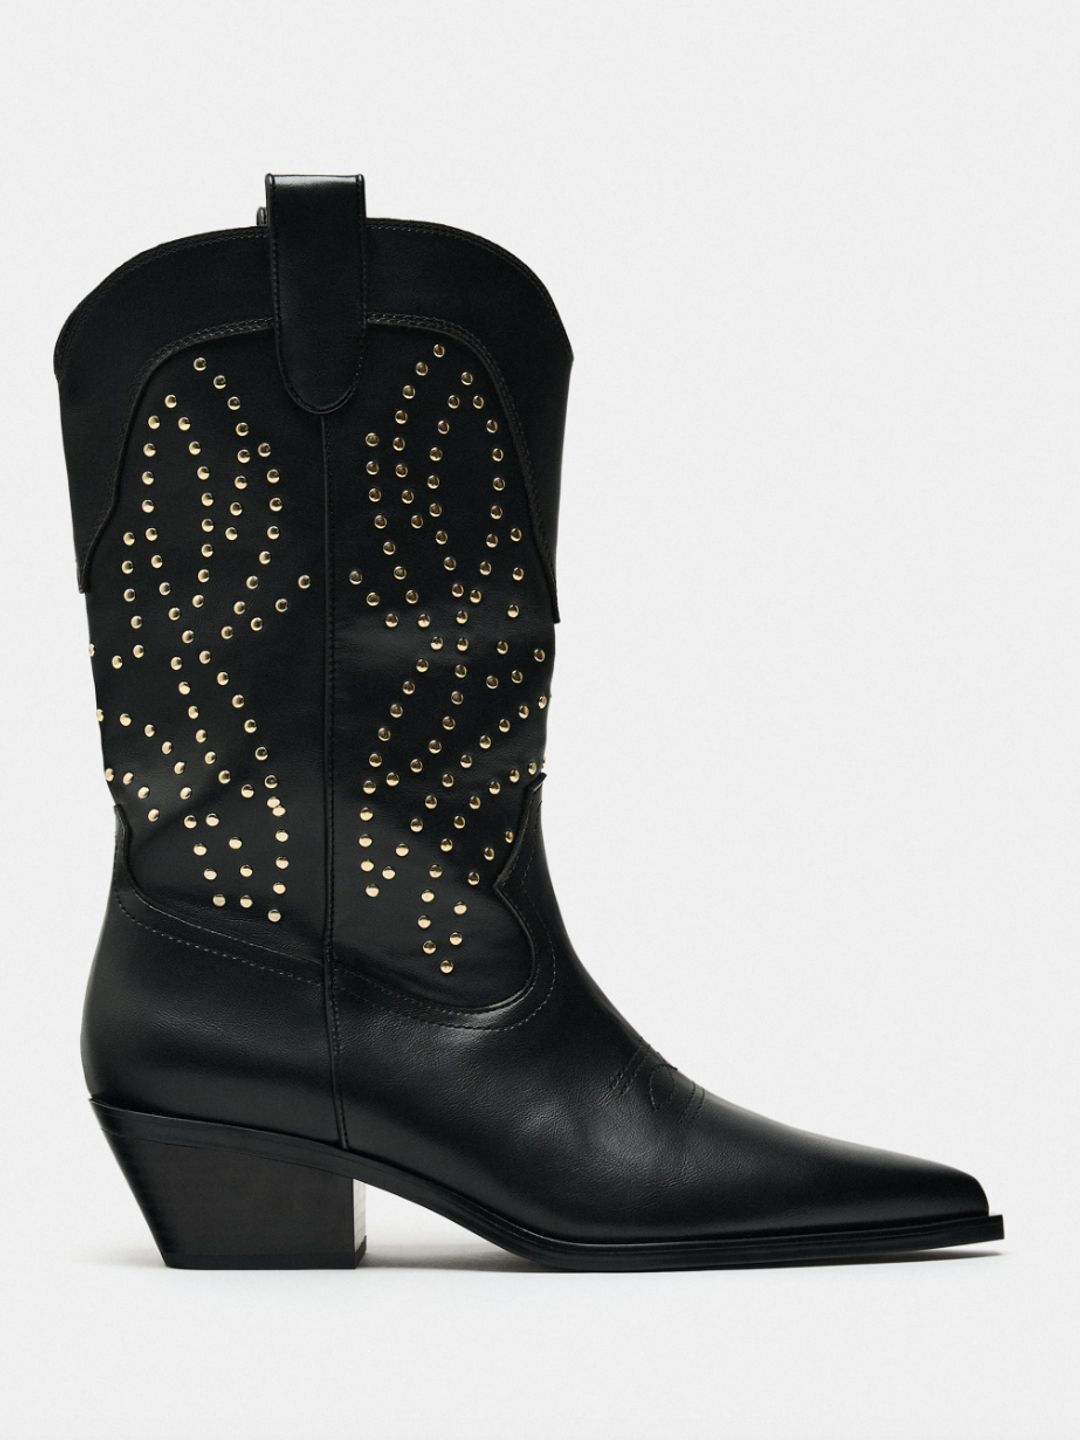 Studded cowboy boots